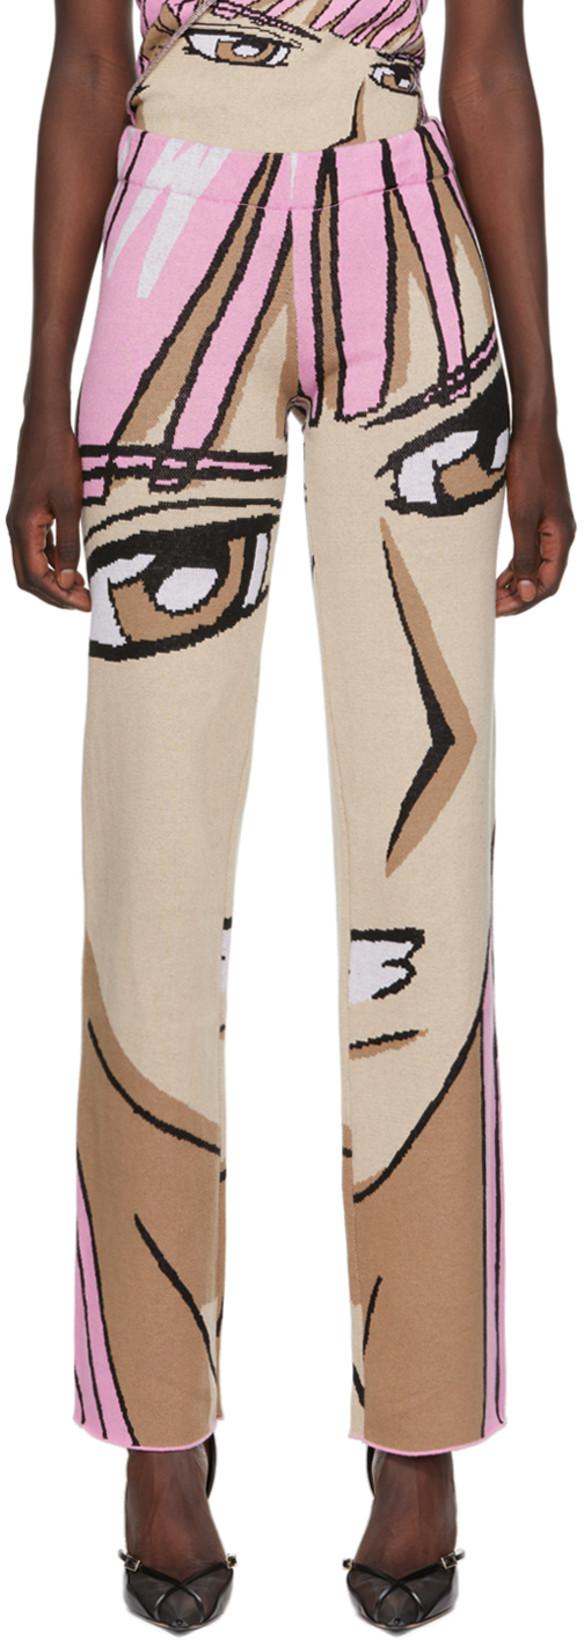 SSENSE Exclusive Pink Anime Lounge Pants by 1XBLUE